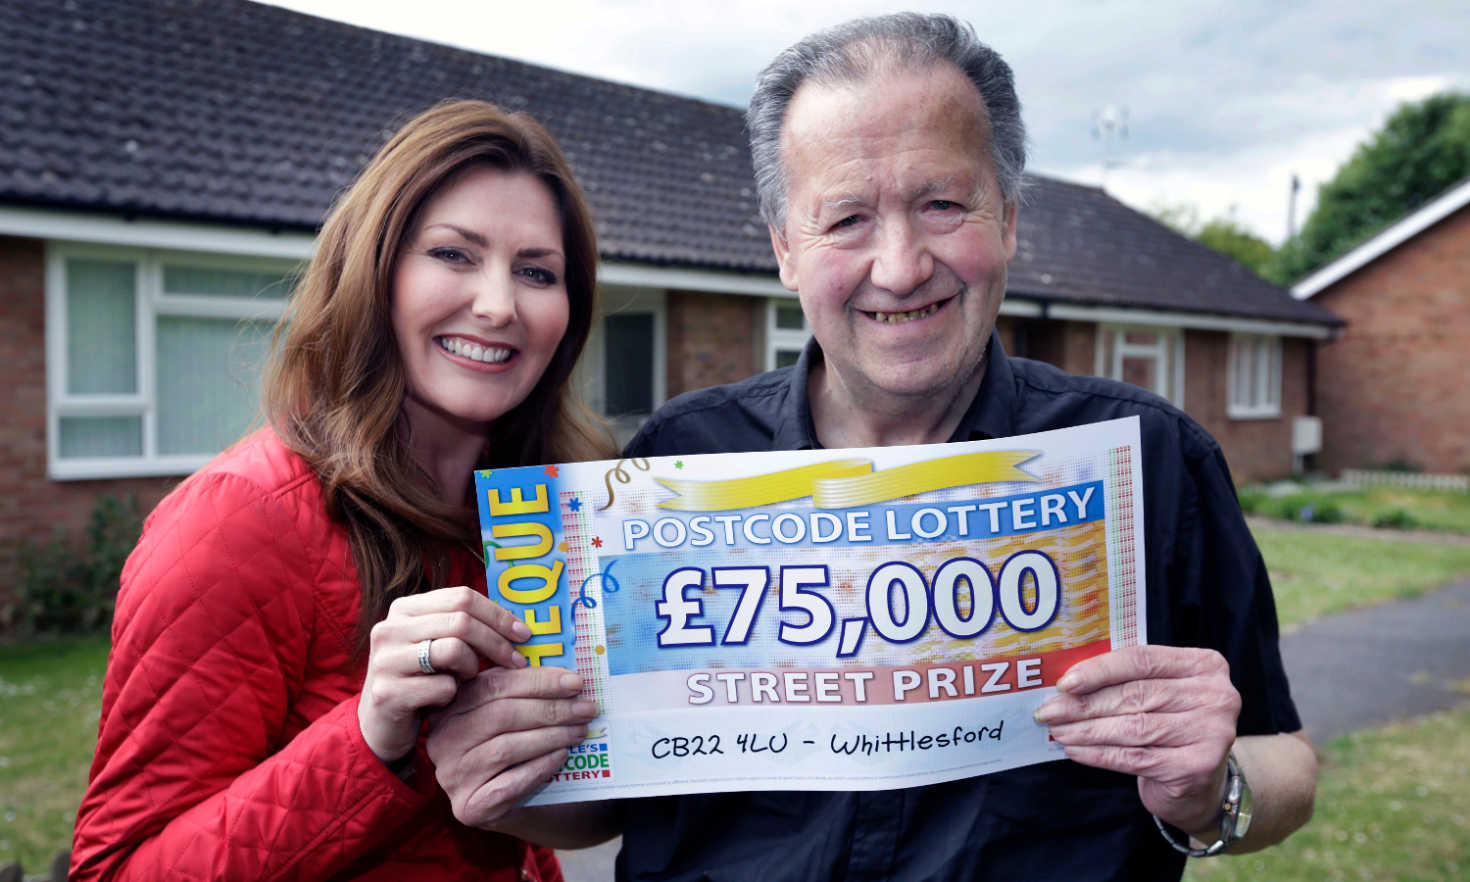 Whittlesford player Graham Seve has won big, as the Saturday Street Prize has landed in CB22 4LU